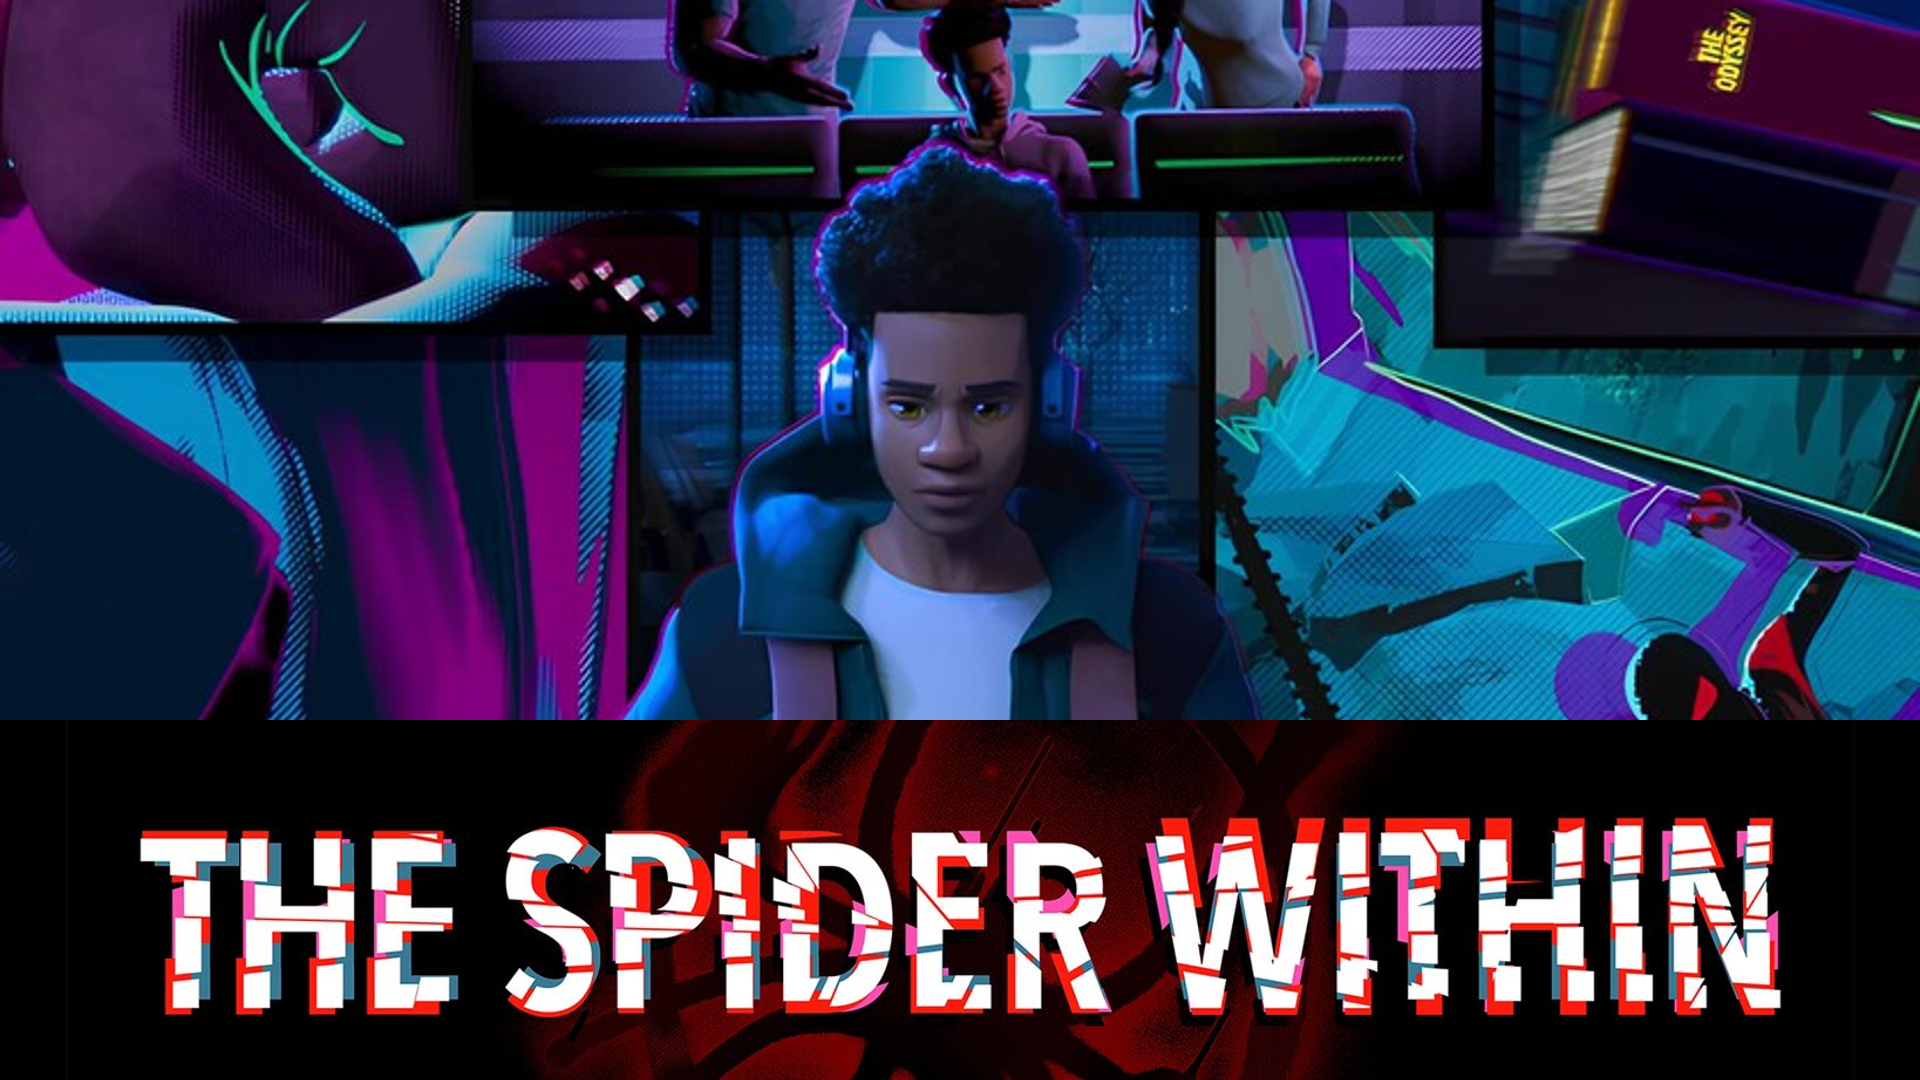 Sony’s Spider-Verse Introduce Horror Elements in Mental Health-Driven Short Film